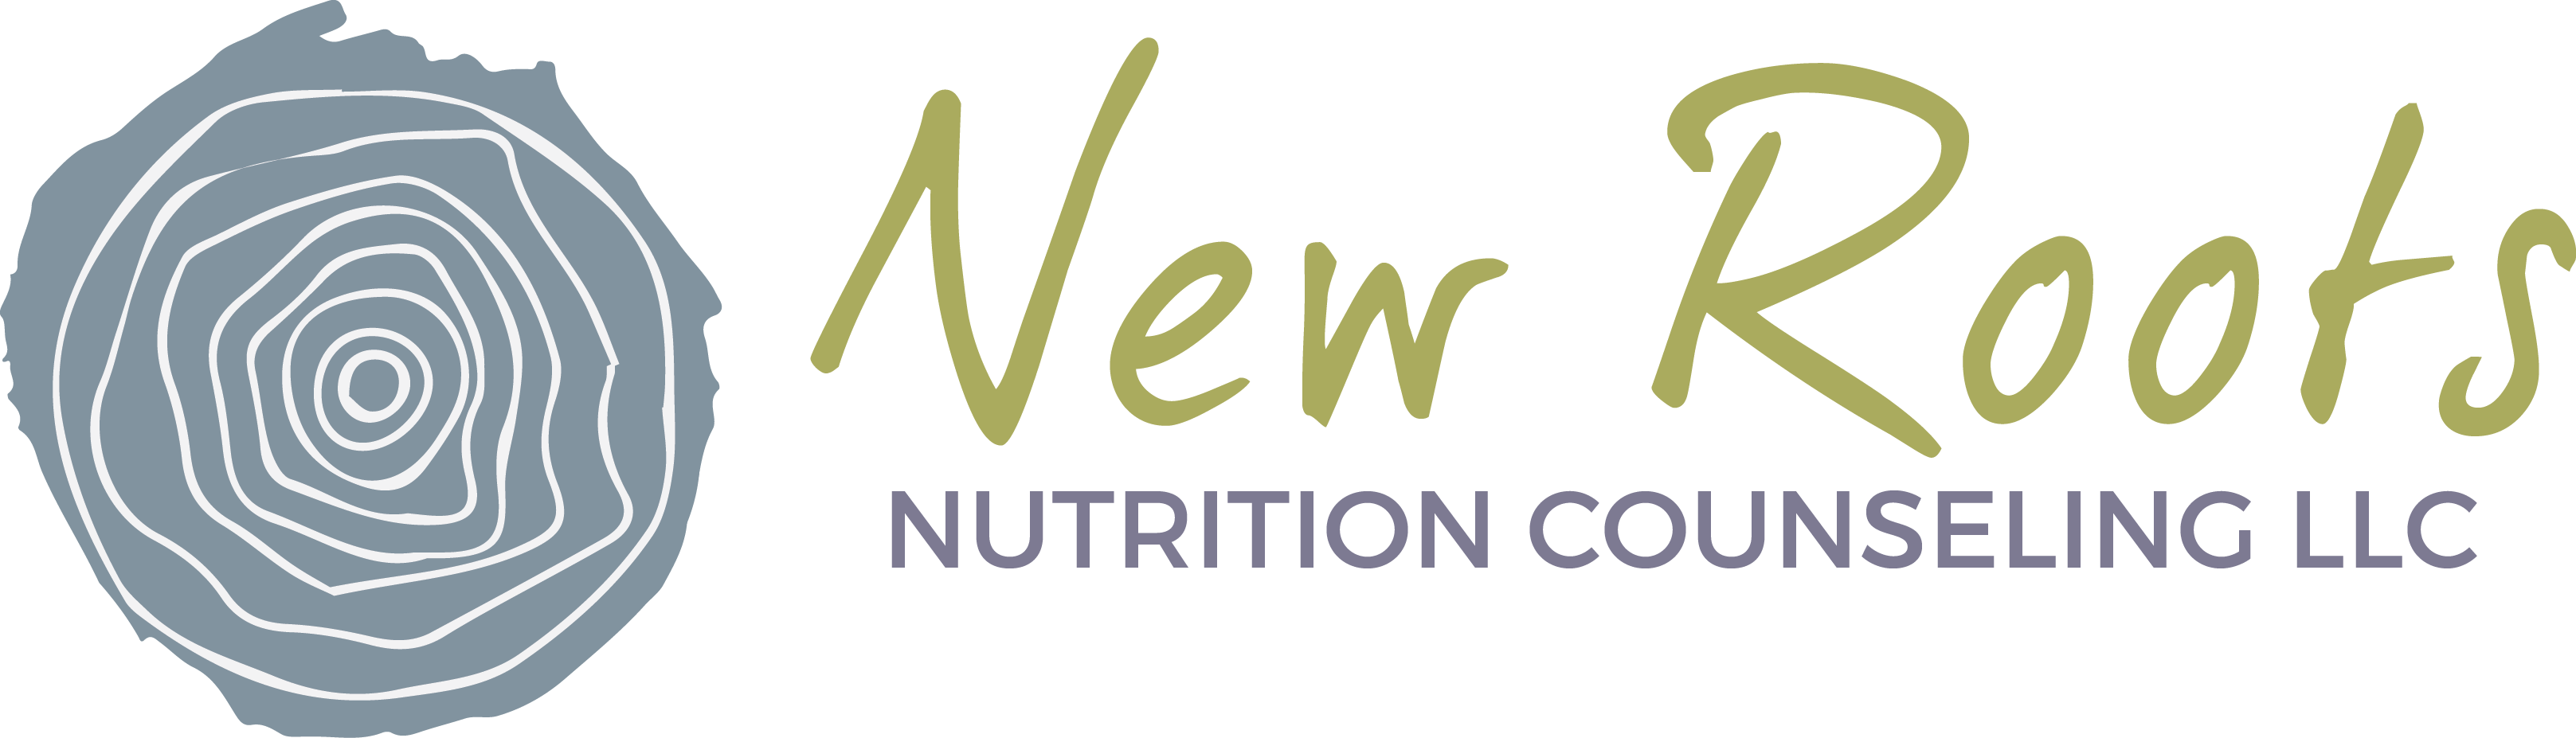 New Roots Nutrition Counseling